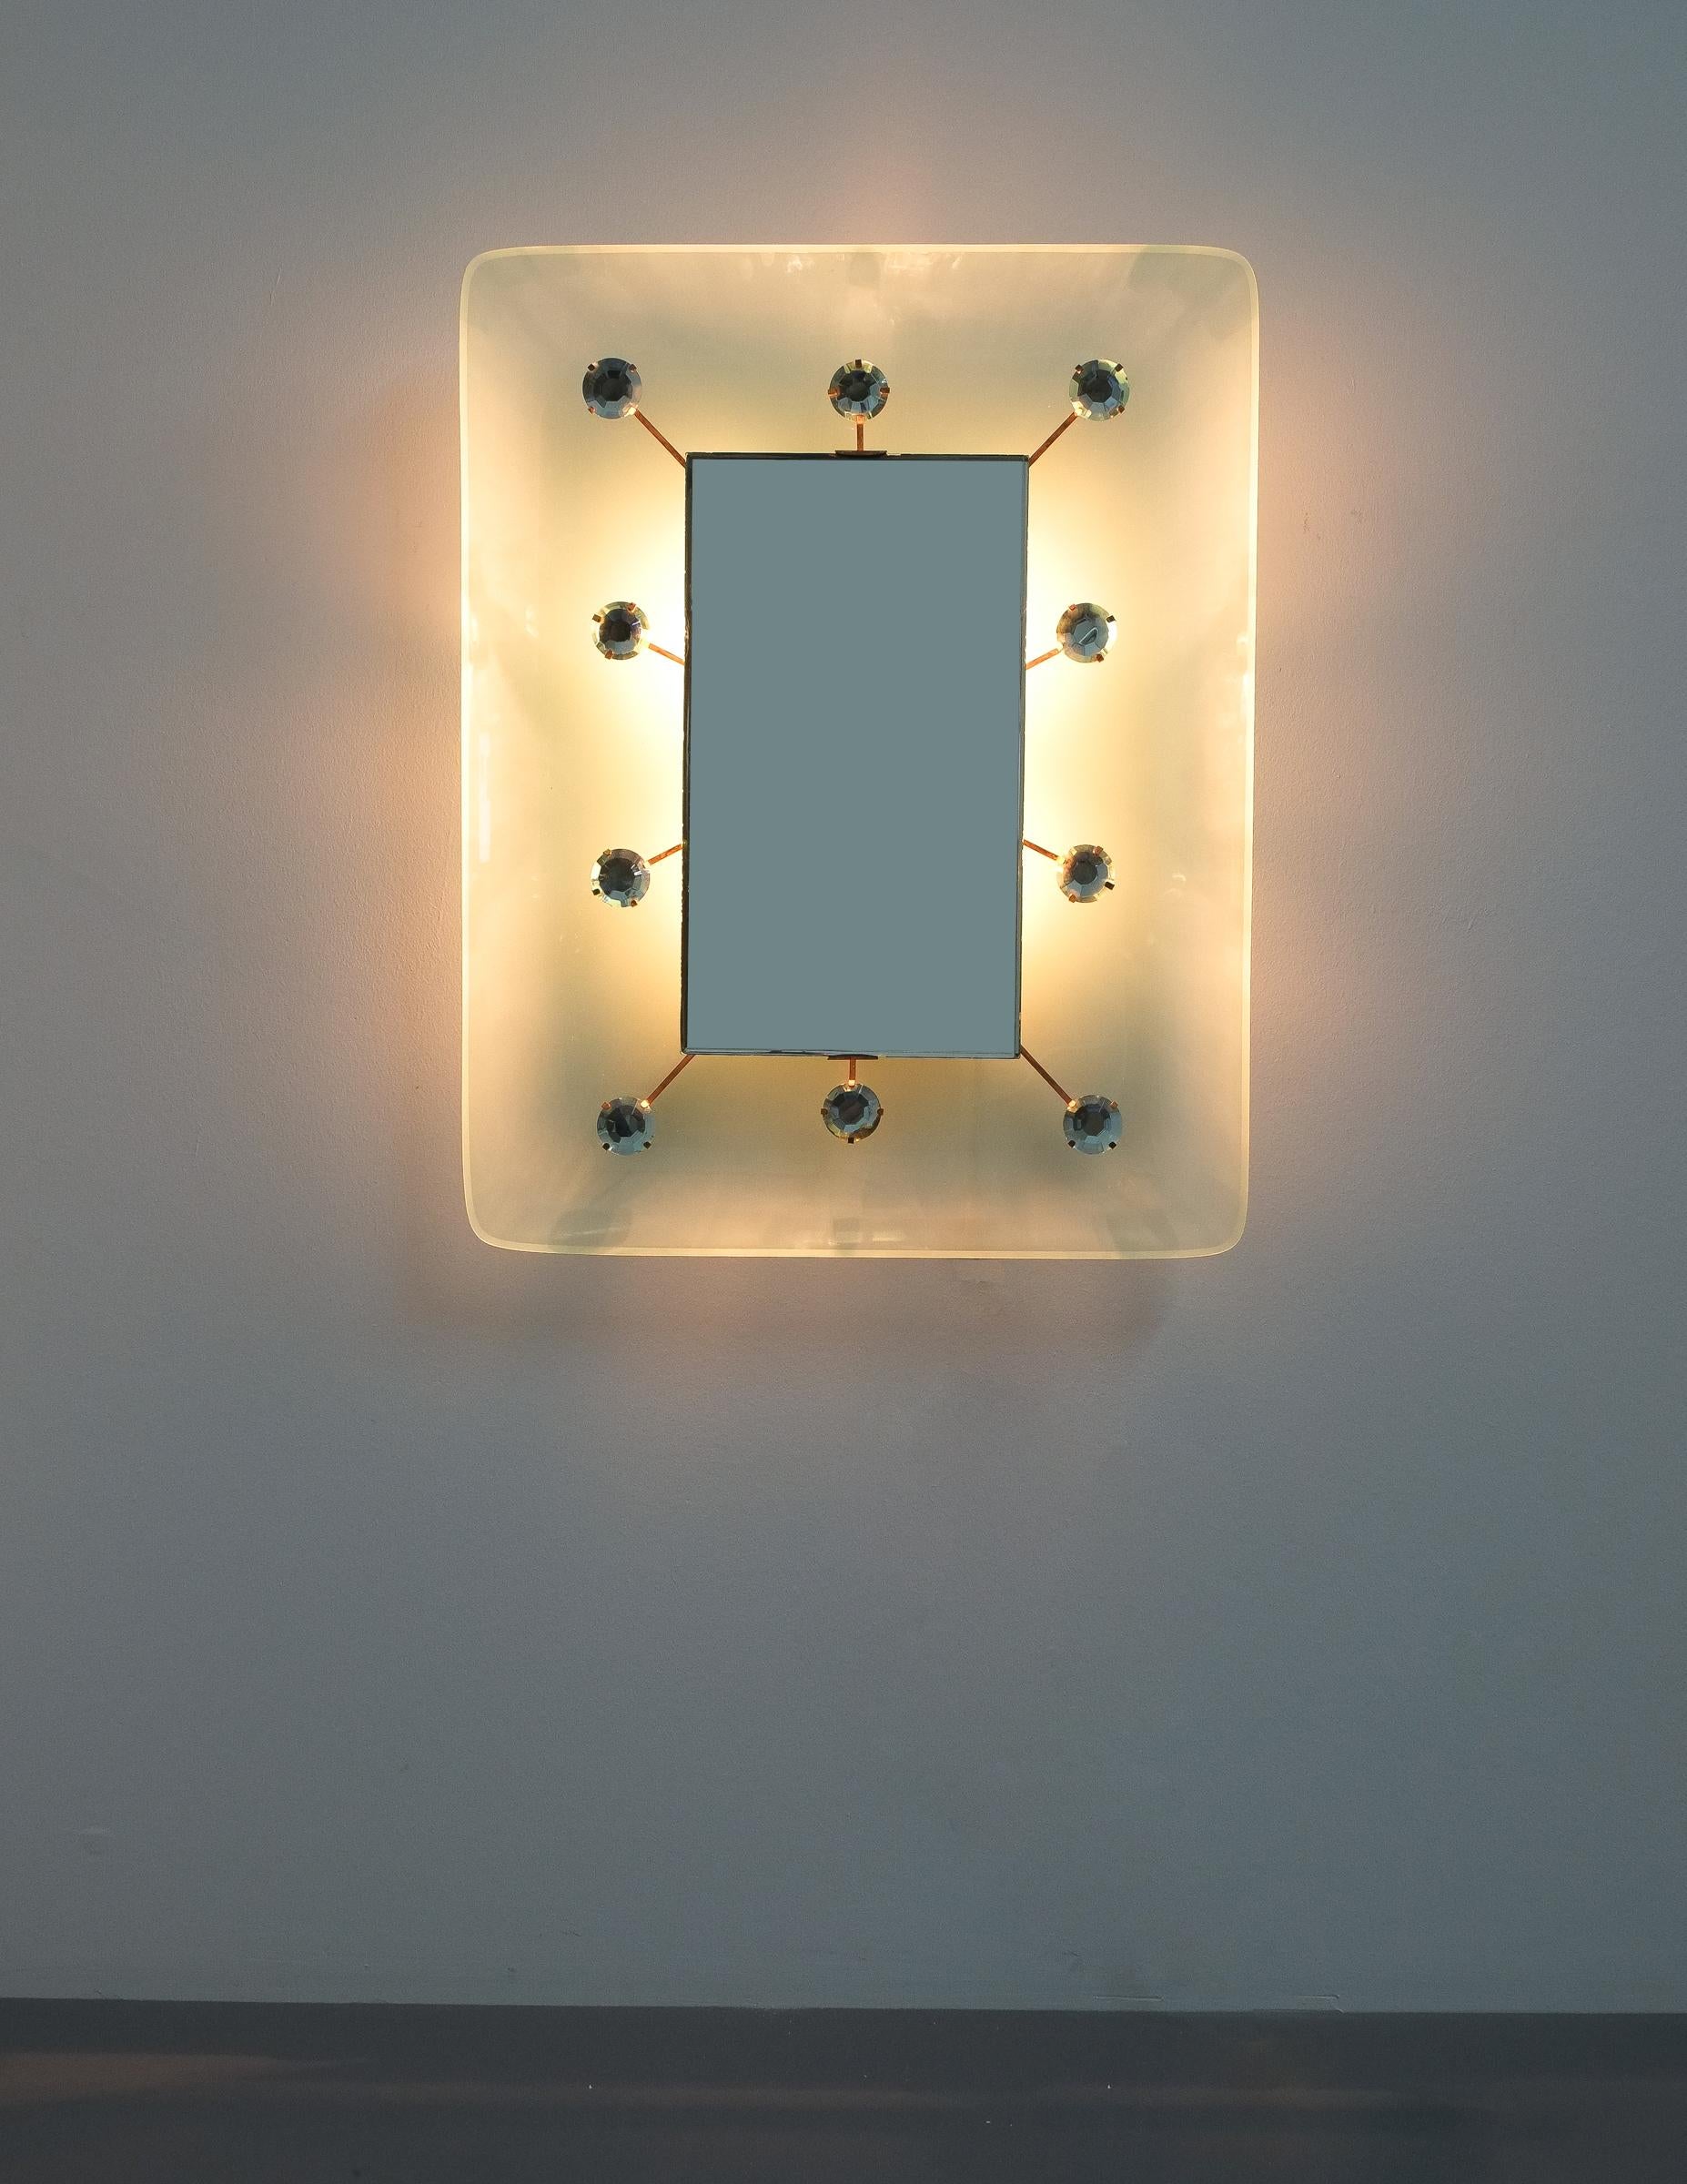 Illuminated Fontana Arte mirror by Max Ingrand, Italy, circa 1960. 31 x 24“ mirror with a thick smooth green-ish glass back-plate and diamond cut-glass pieces on a brass structure. Good to very good condition, no chips to the glass.

Literature: